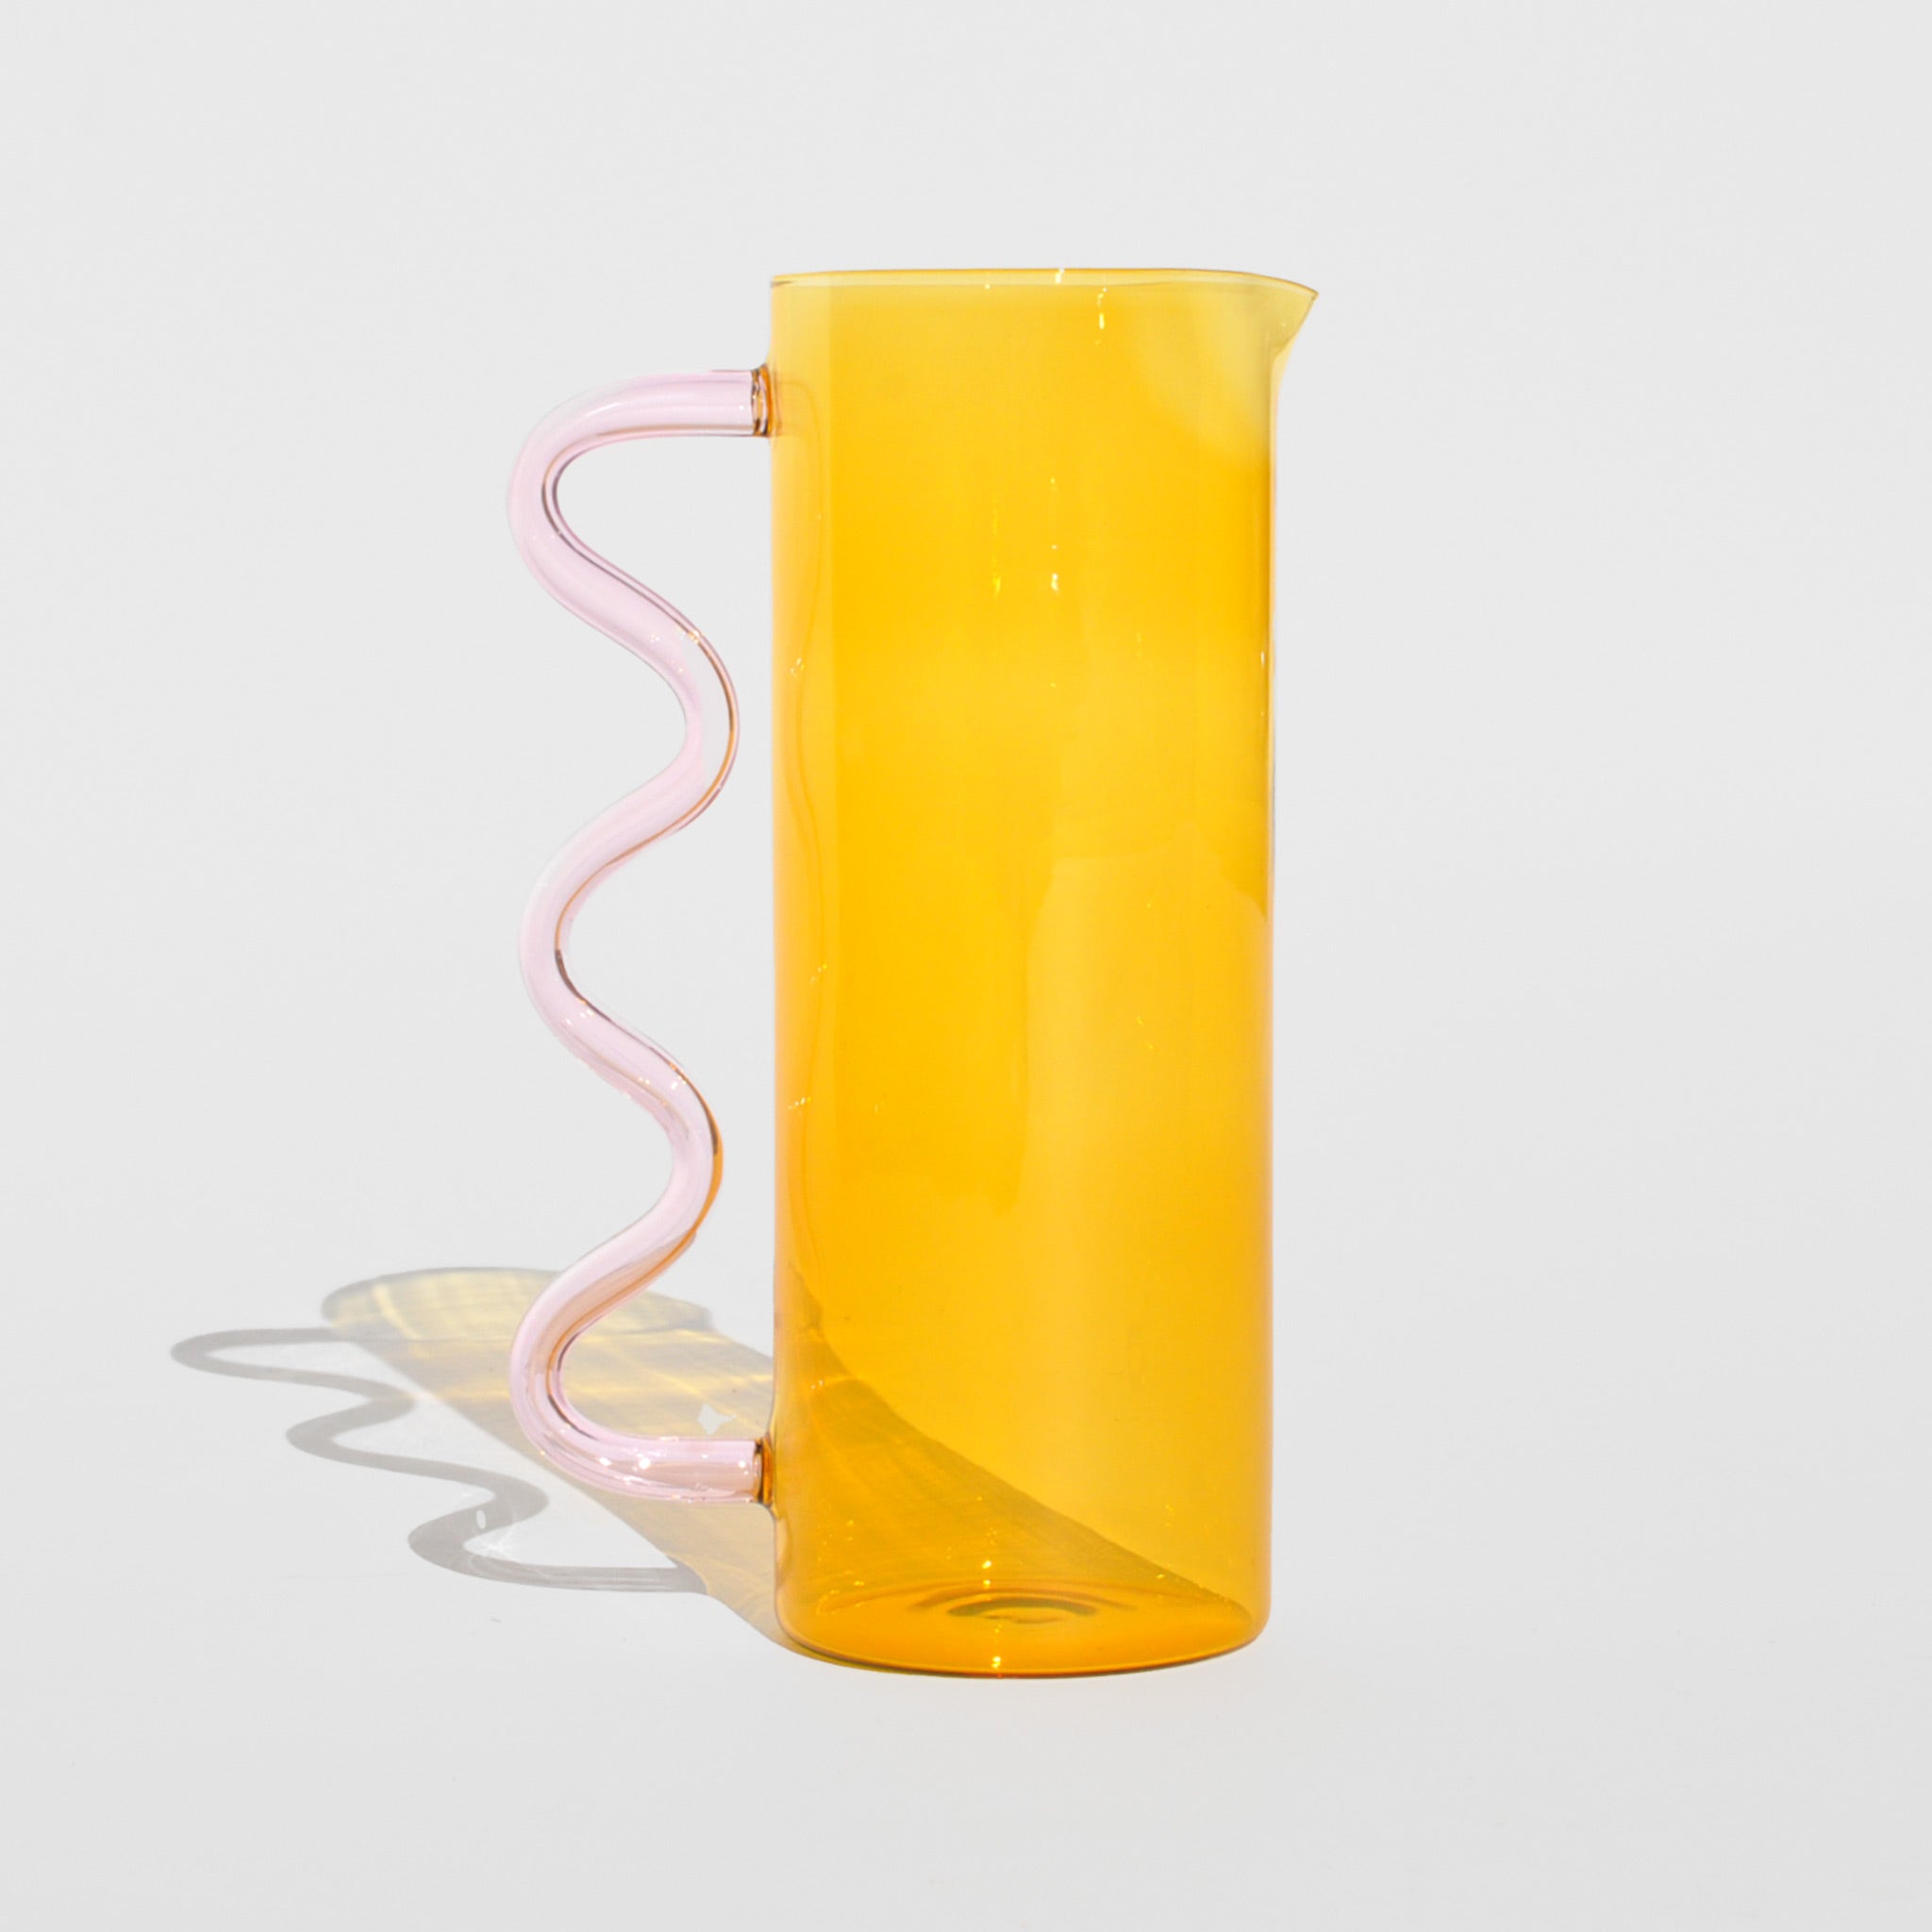 Photo of the Wave Pitcher - Yellow/Pink, a tall glass pitcher with a yellow cylindrical tank and a pink wavy glass handle.